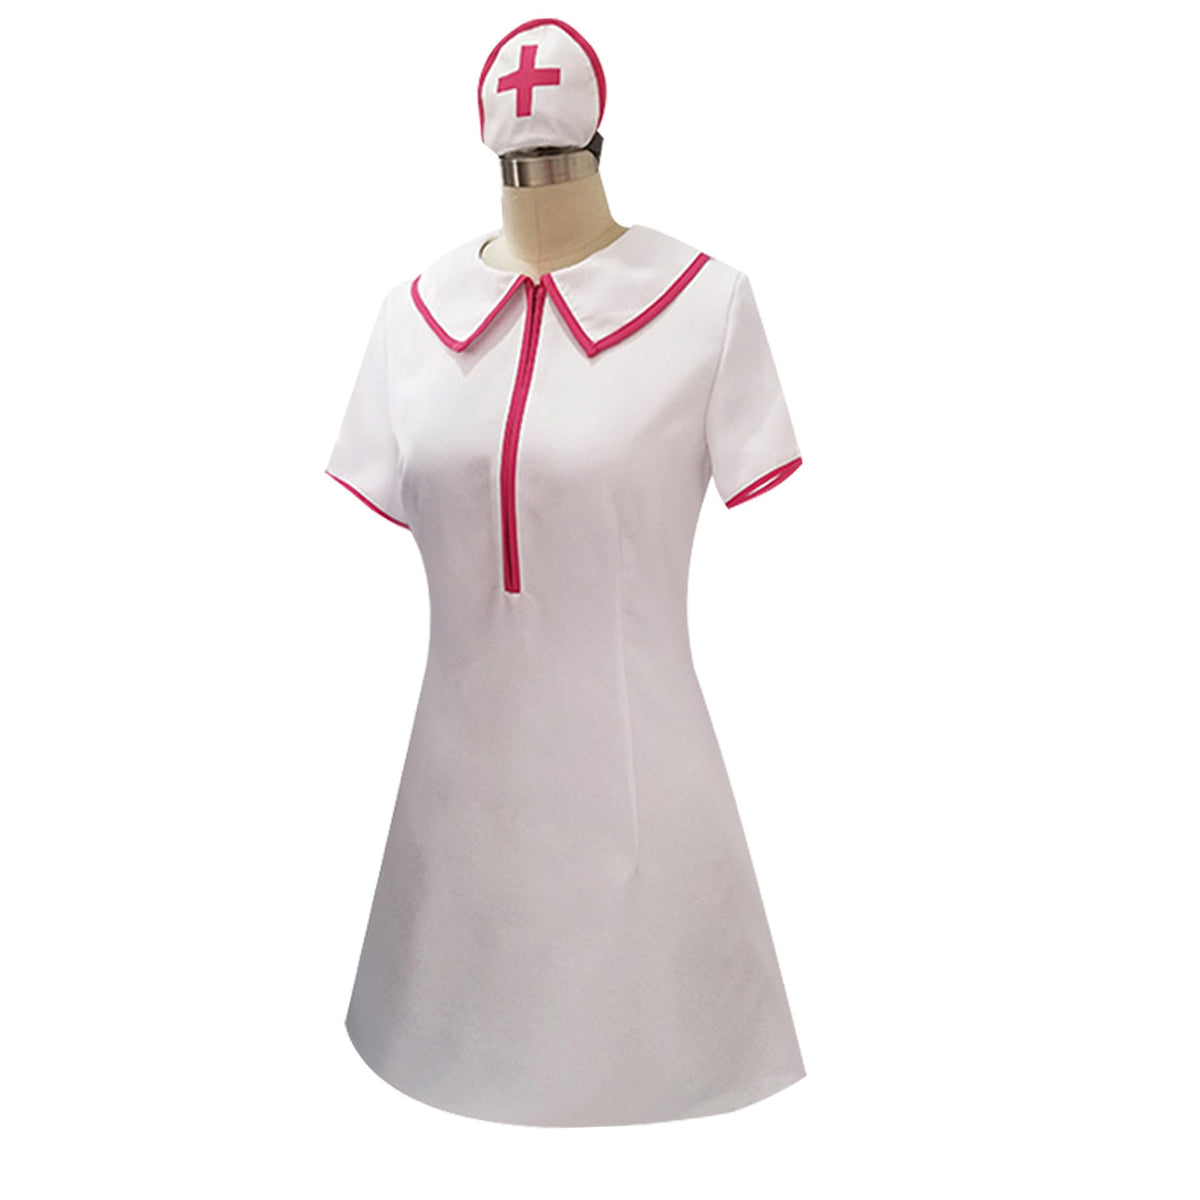 Makima Nurse Outfit. Chainsaw Man Cosplay Costume